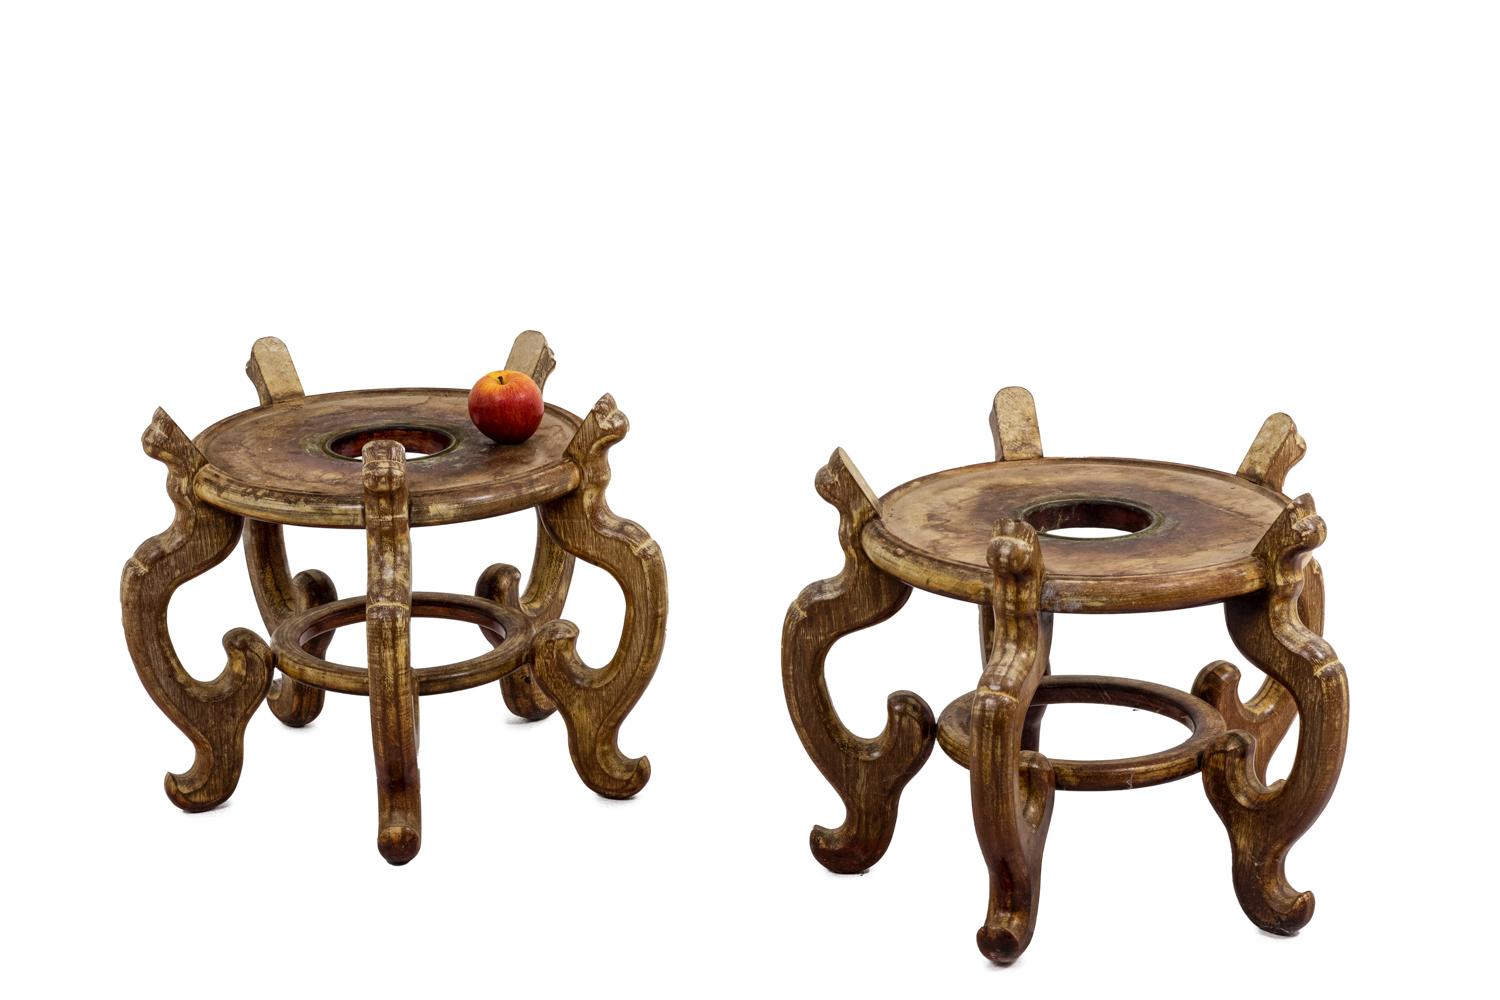 Pair of Asian-style ironwood plinths standing on five scalloped feet joined by a circular spacer.

Work realized in the 1900s.